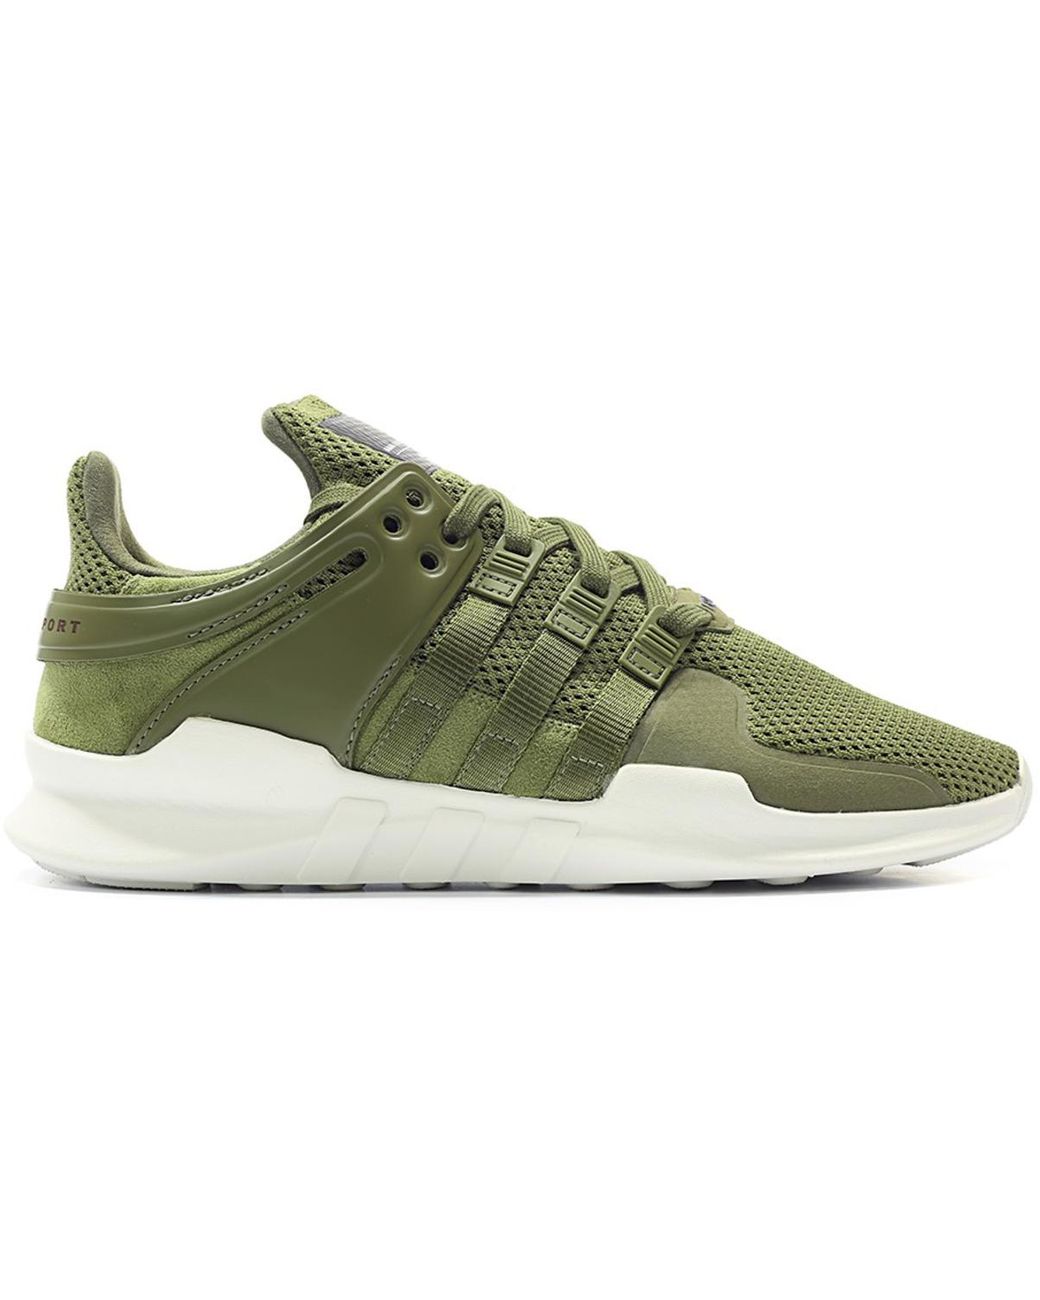 Adidas Eqt Support Adv Olive Cargo In Olive Cargo Olive Cargo Red Green For Men Lyst